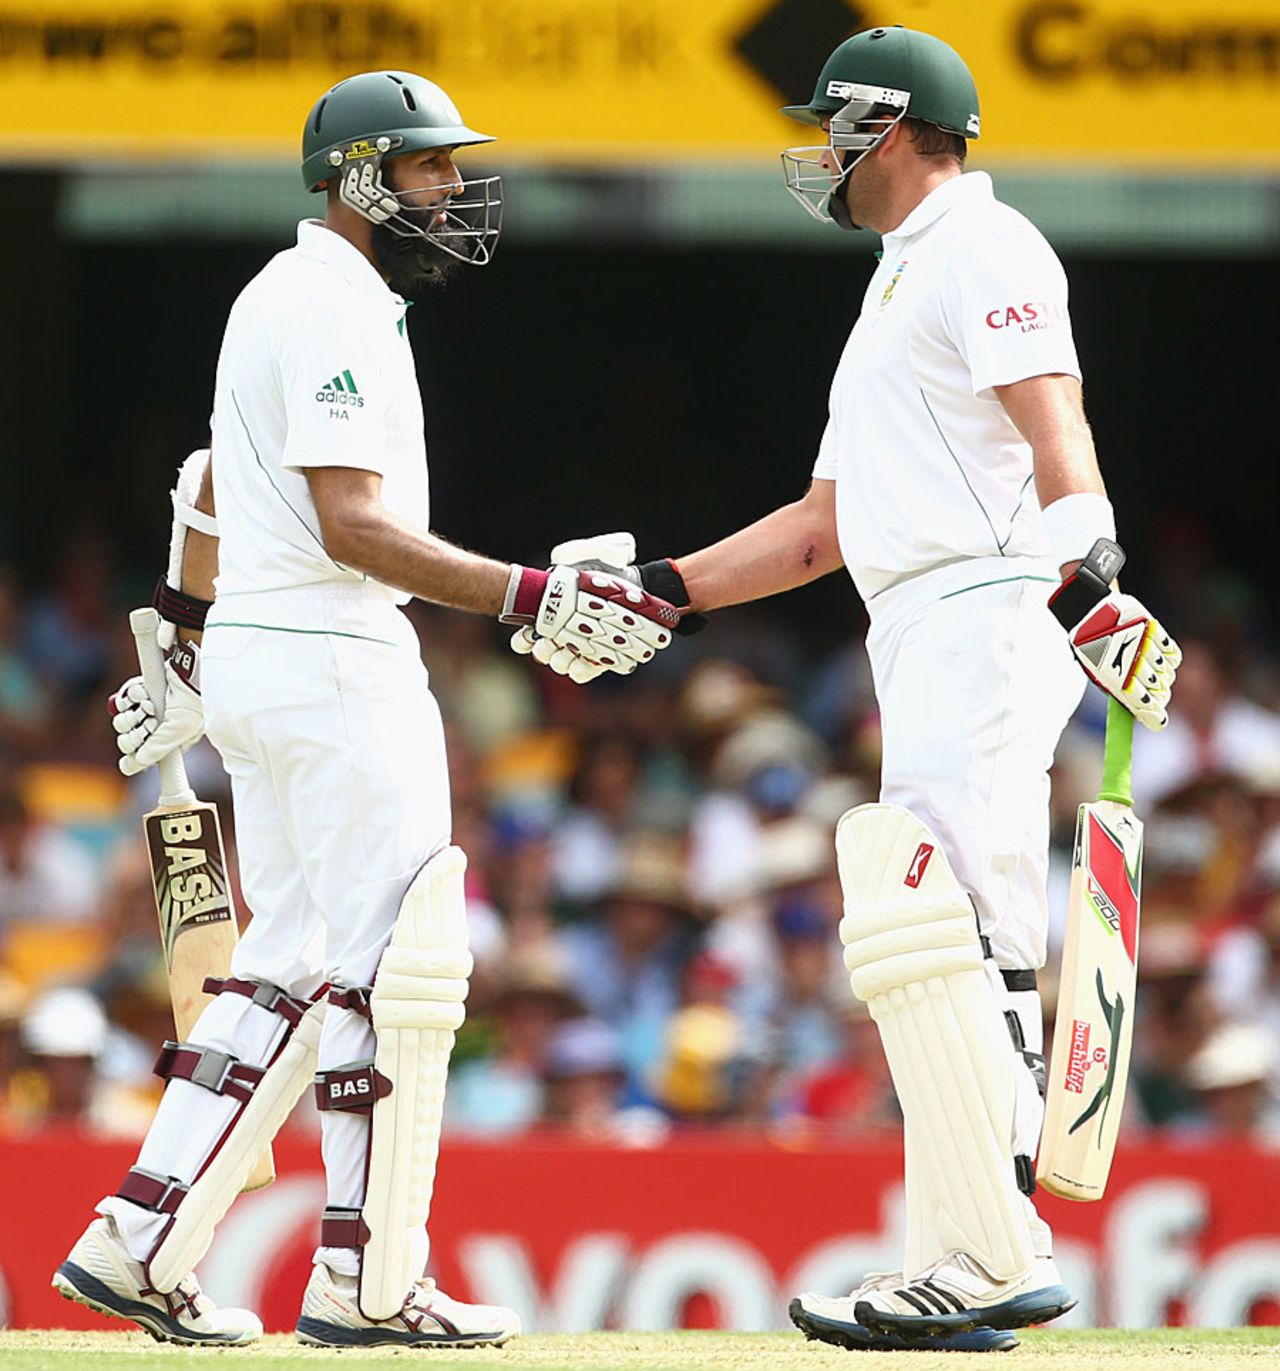 Jacques Kallis shakes hands with Hashim Amla for passing fifty, Australia v South Africa, 1st Test, Brisbane, 1st day, November 9, 2012